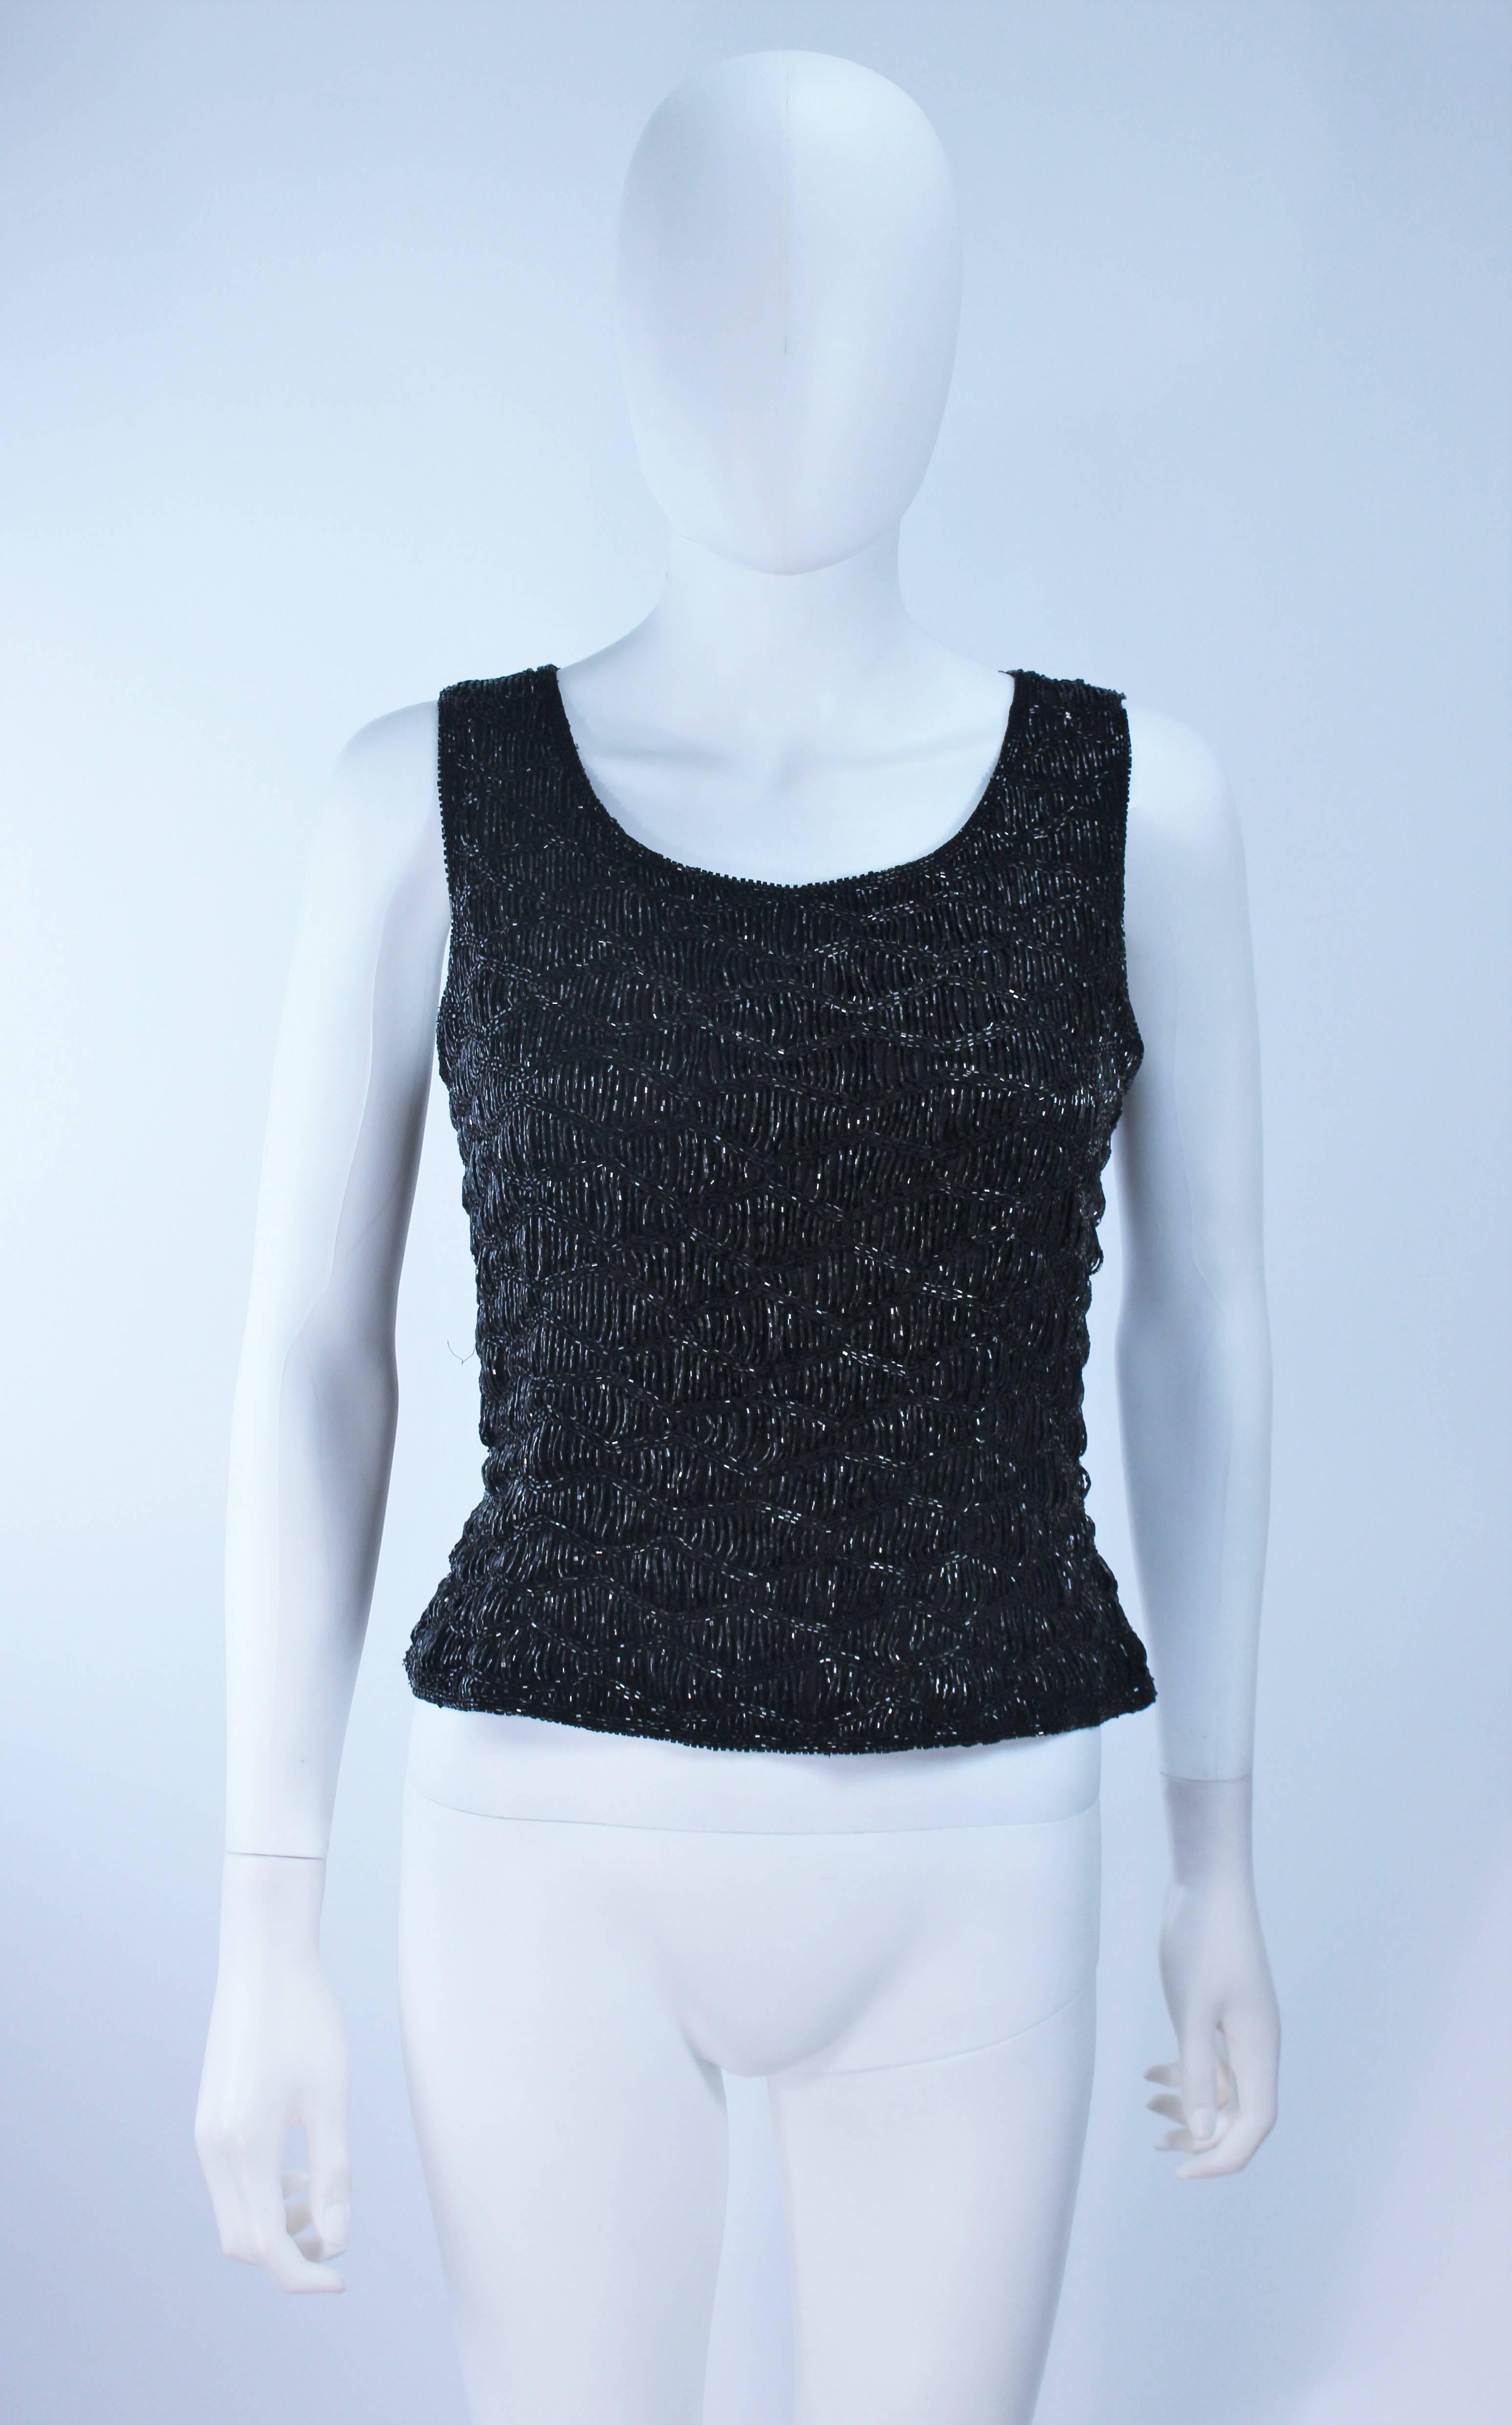  This handmade blouse is composed of a black silk with hand beading. Features a sleeveless style with a zipper closure. In excellent condition.

  **Please cross-reference measurements for personal accuracy. 

Measures (Approximately)
Length: